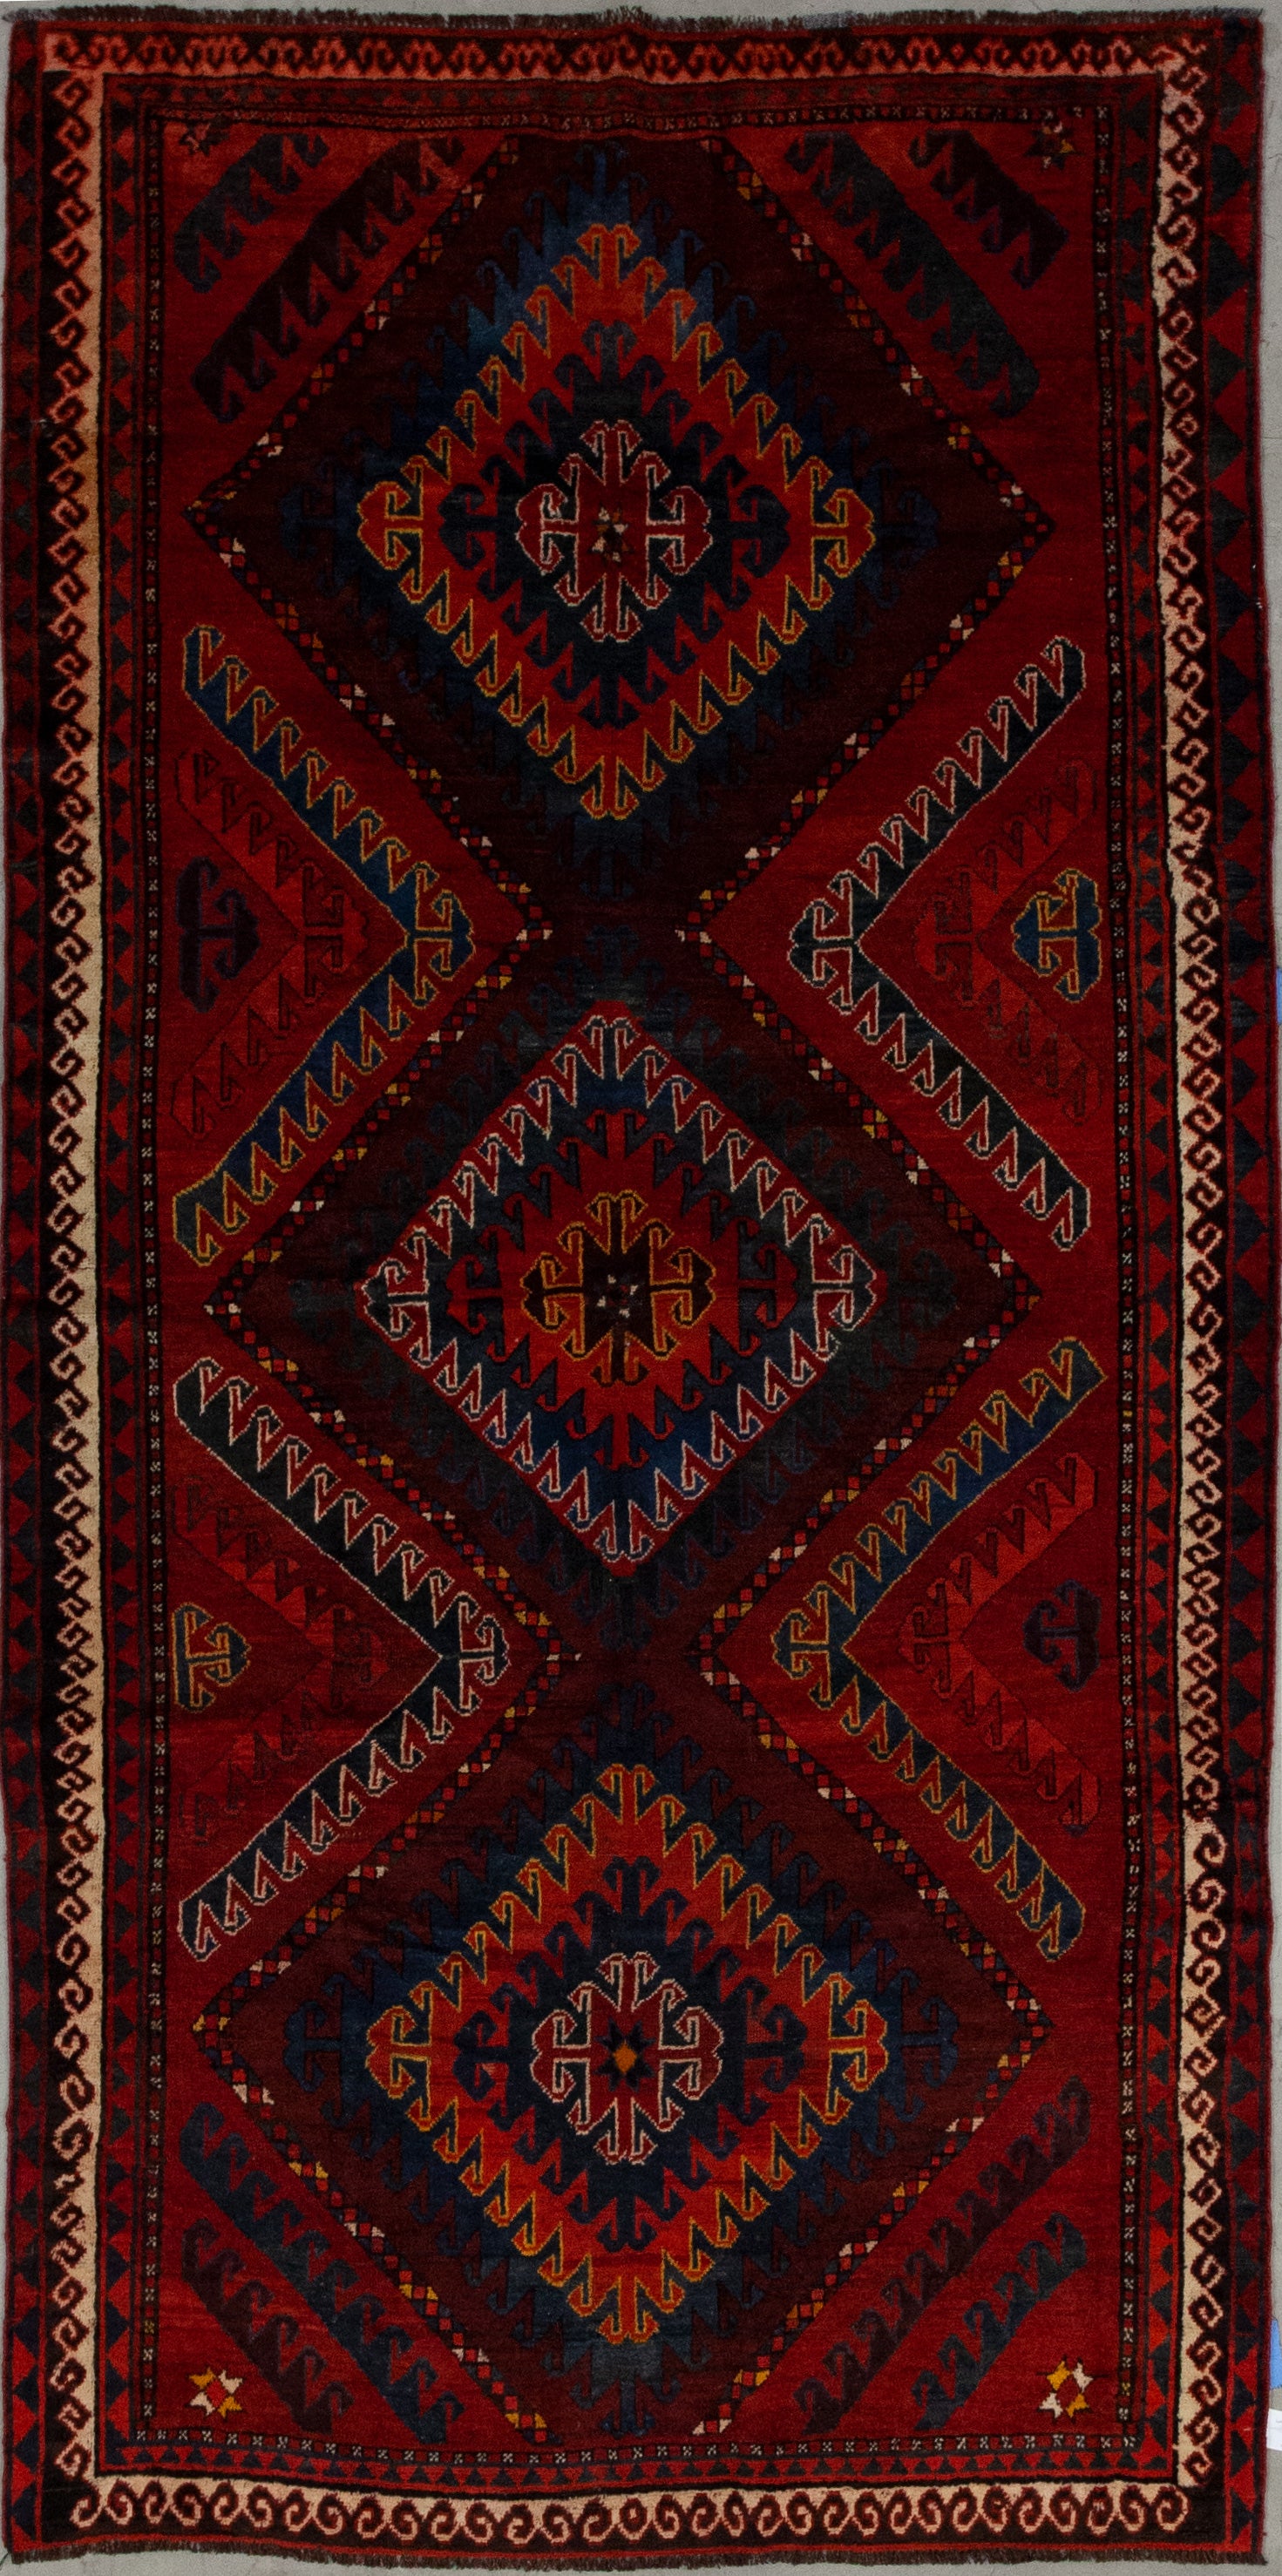 This powerful carpet comes with an intense and vibrating color scheme which has variations of red as the dominant tone plus orange, blue, yellow, brown, and white. 